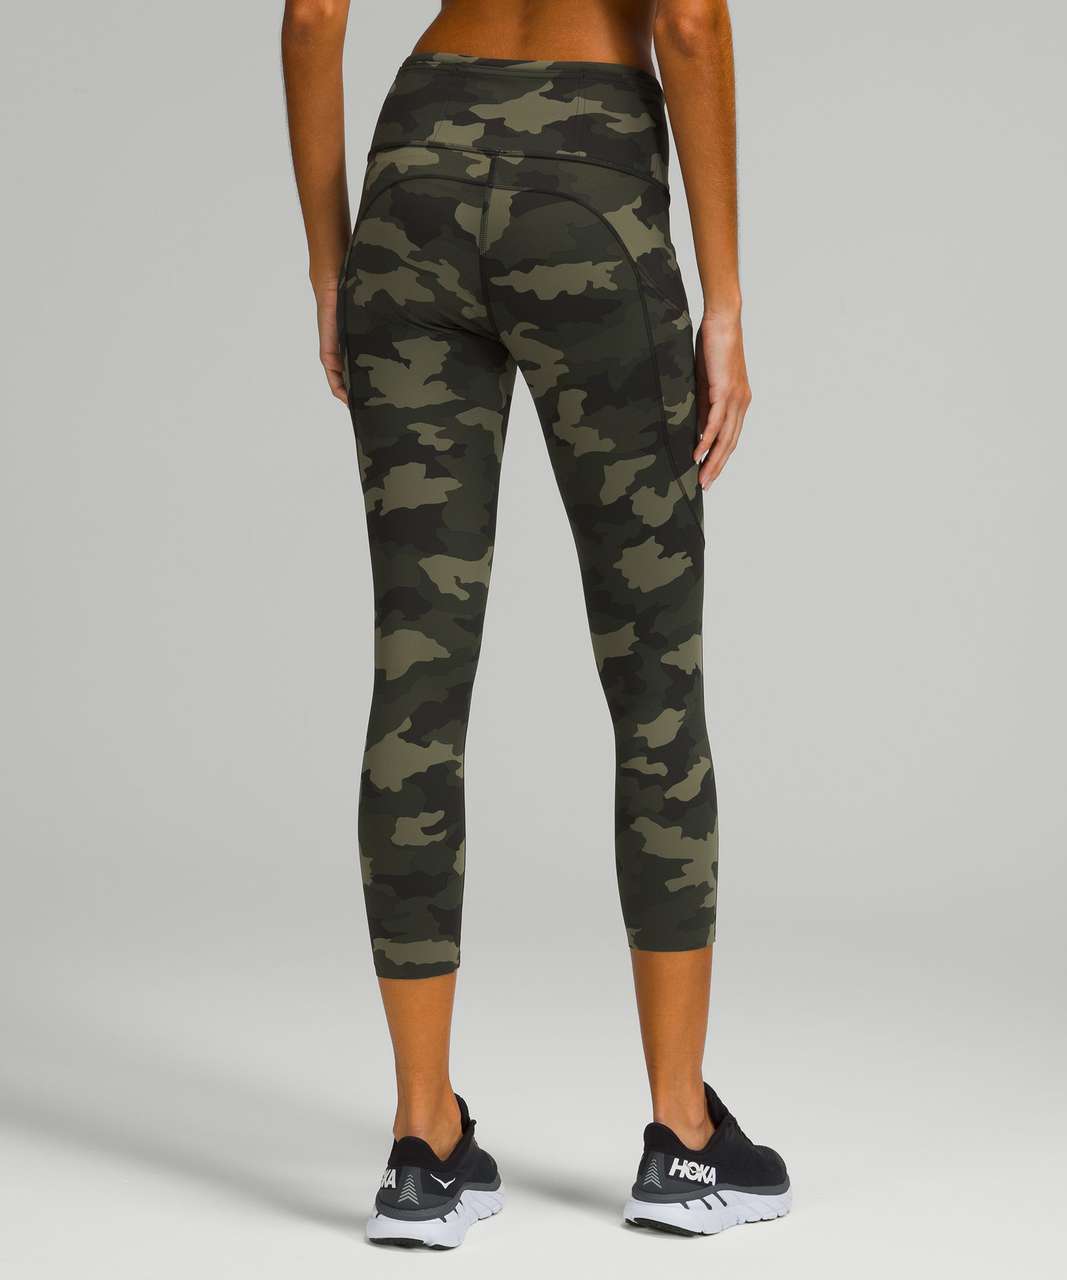 Lululemon Fast and Free High Rise Crop Heritage 365 Camo Crispin Green  Multi Size 6 - $75 (41% Off Retail) - From Lady